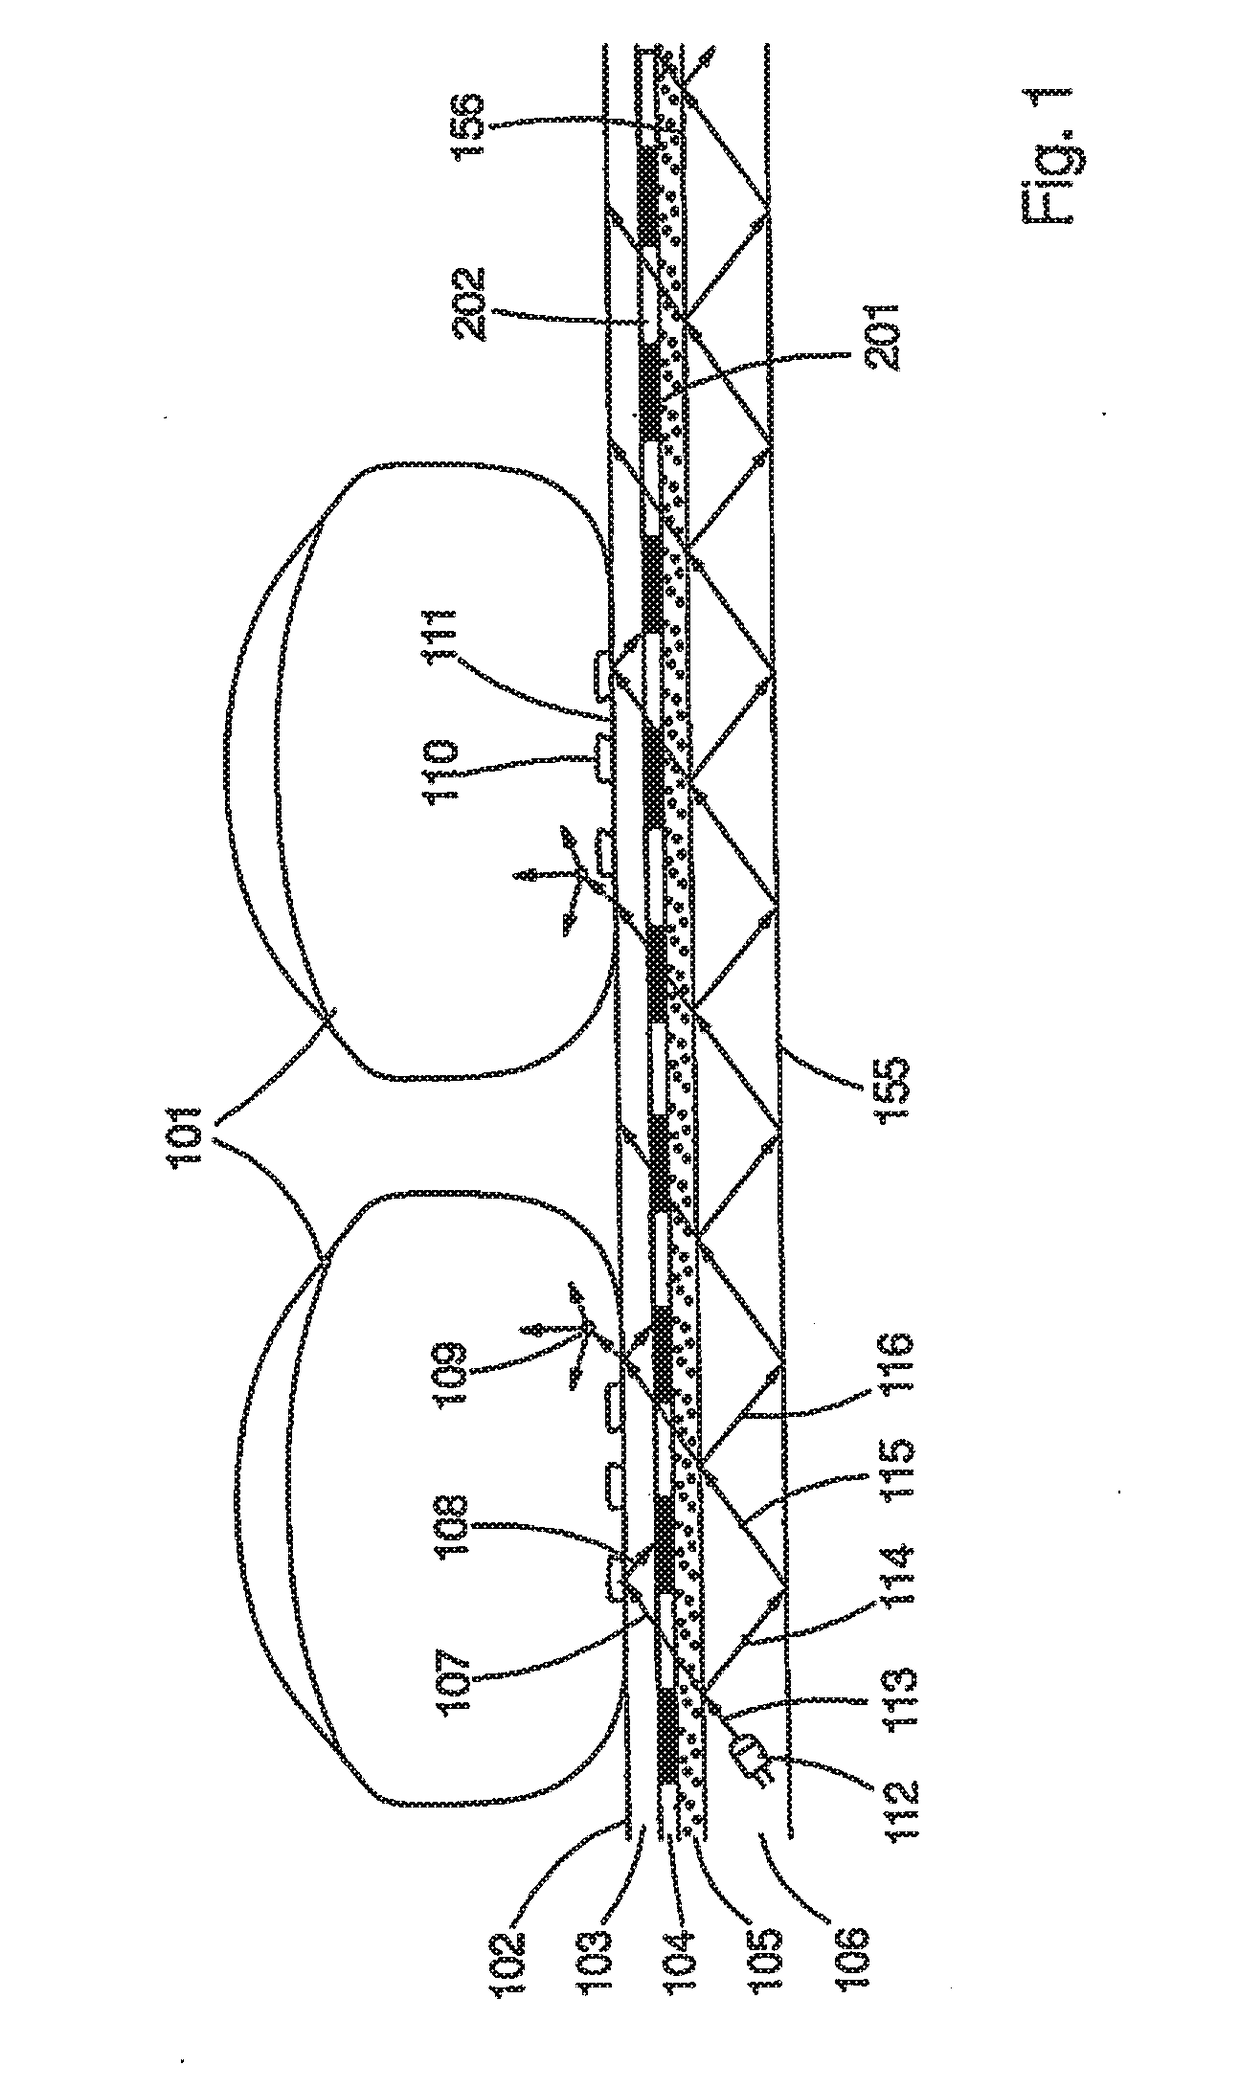 Device for the contact-based simultaneous capture of prints of autopodia